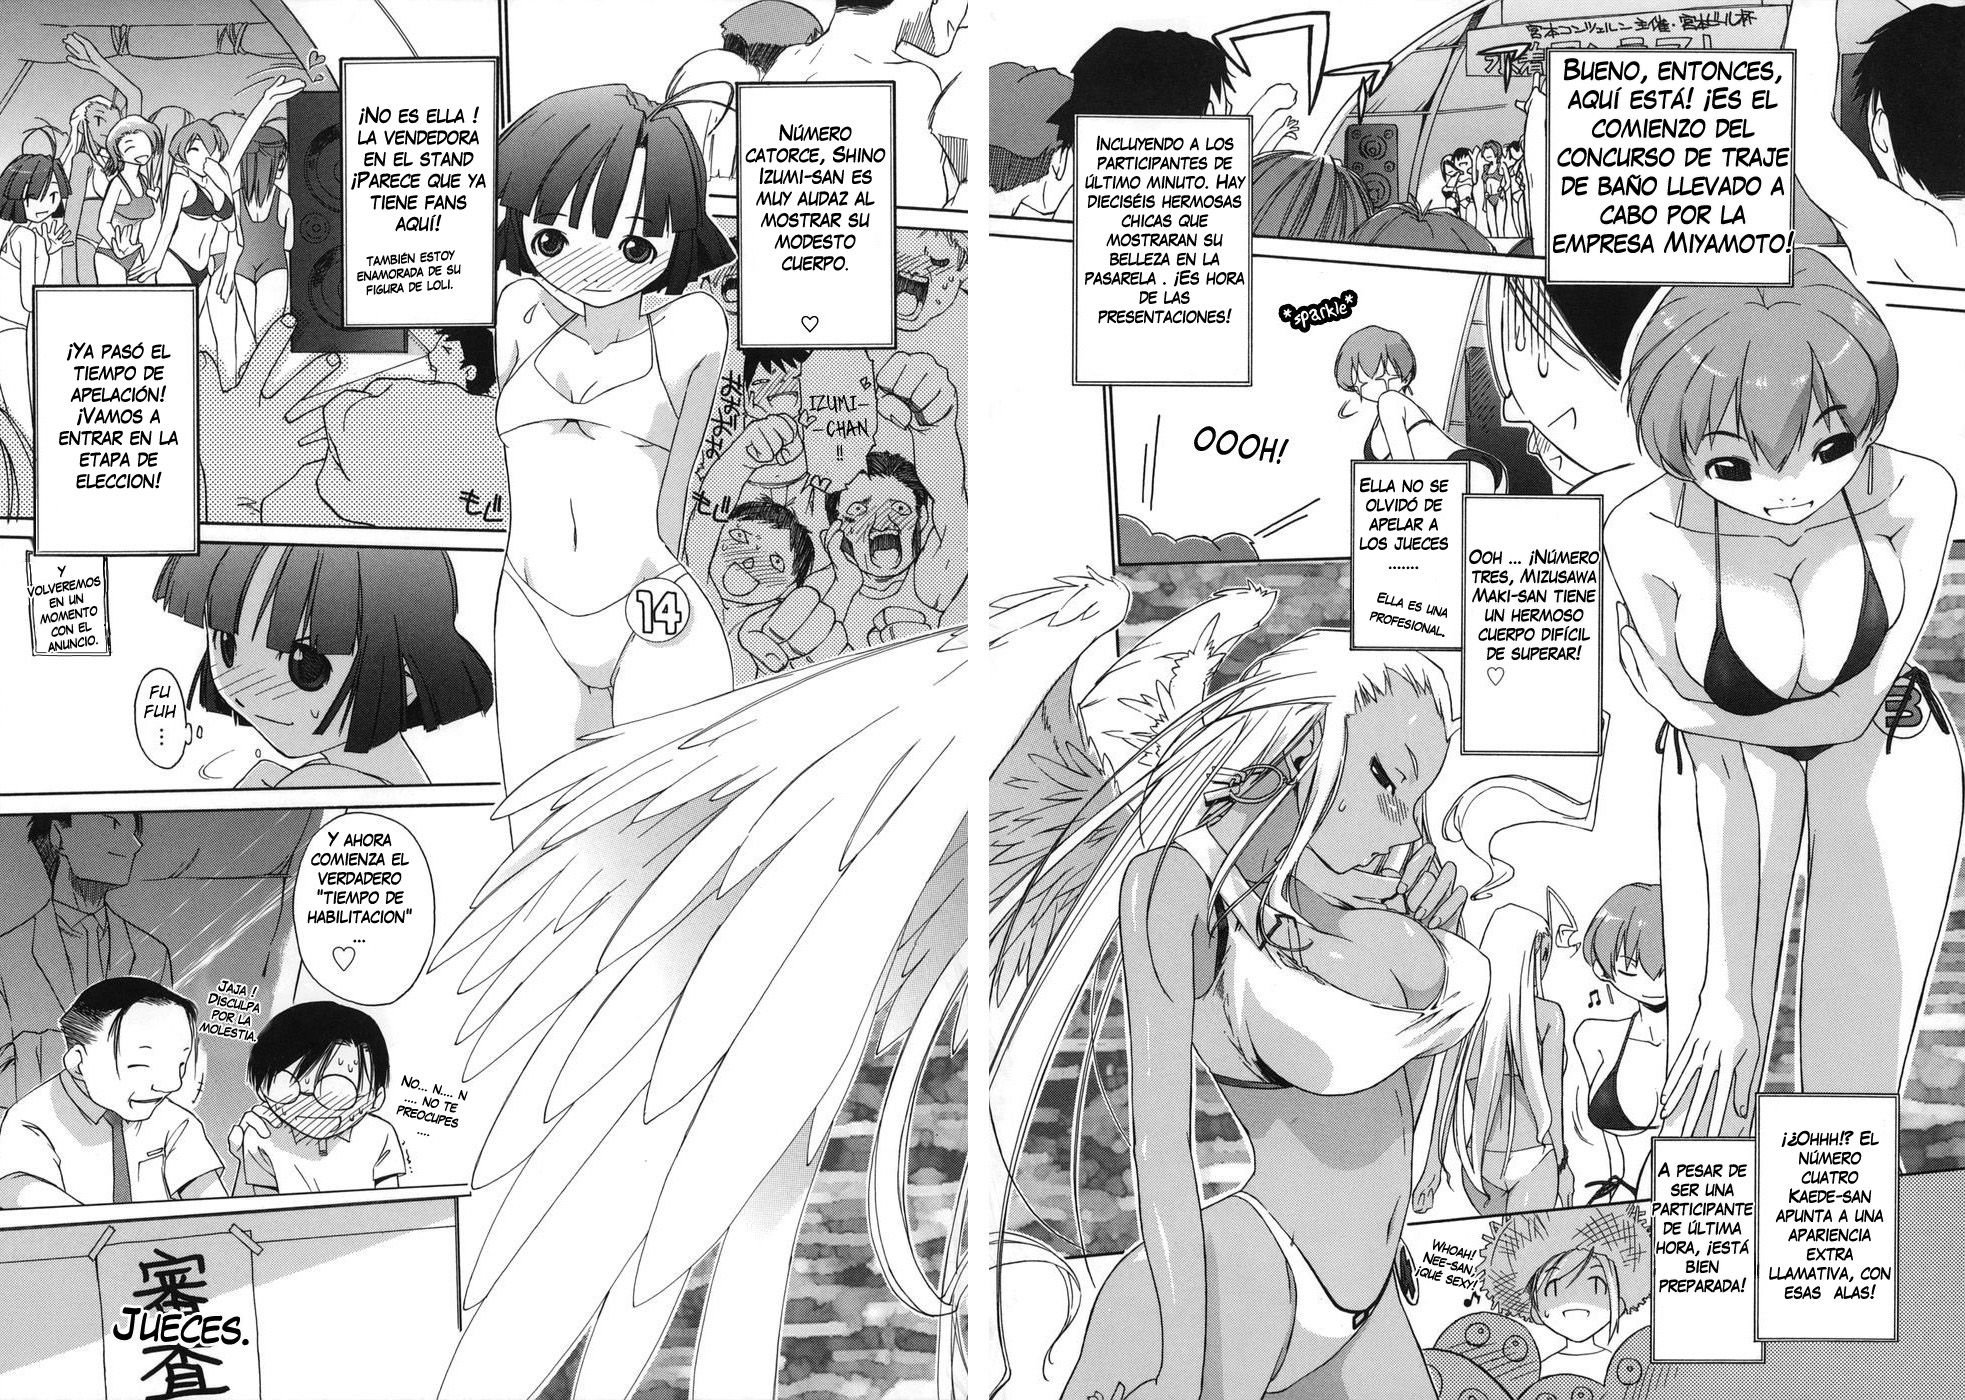 Angels Short Capitulo 7 - 9